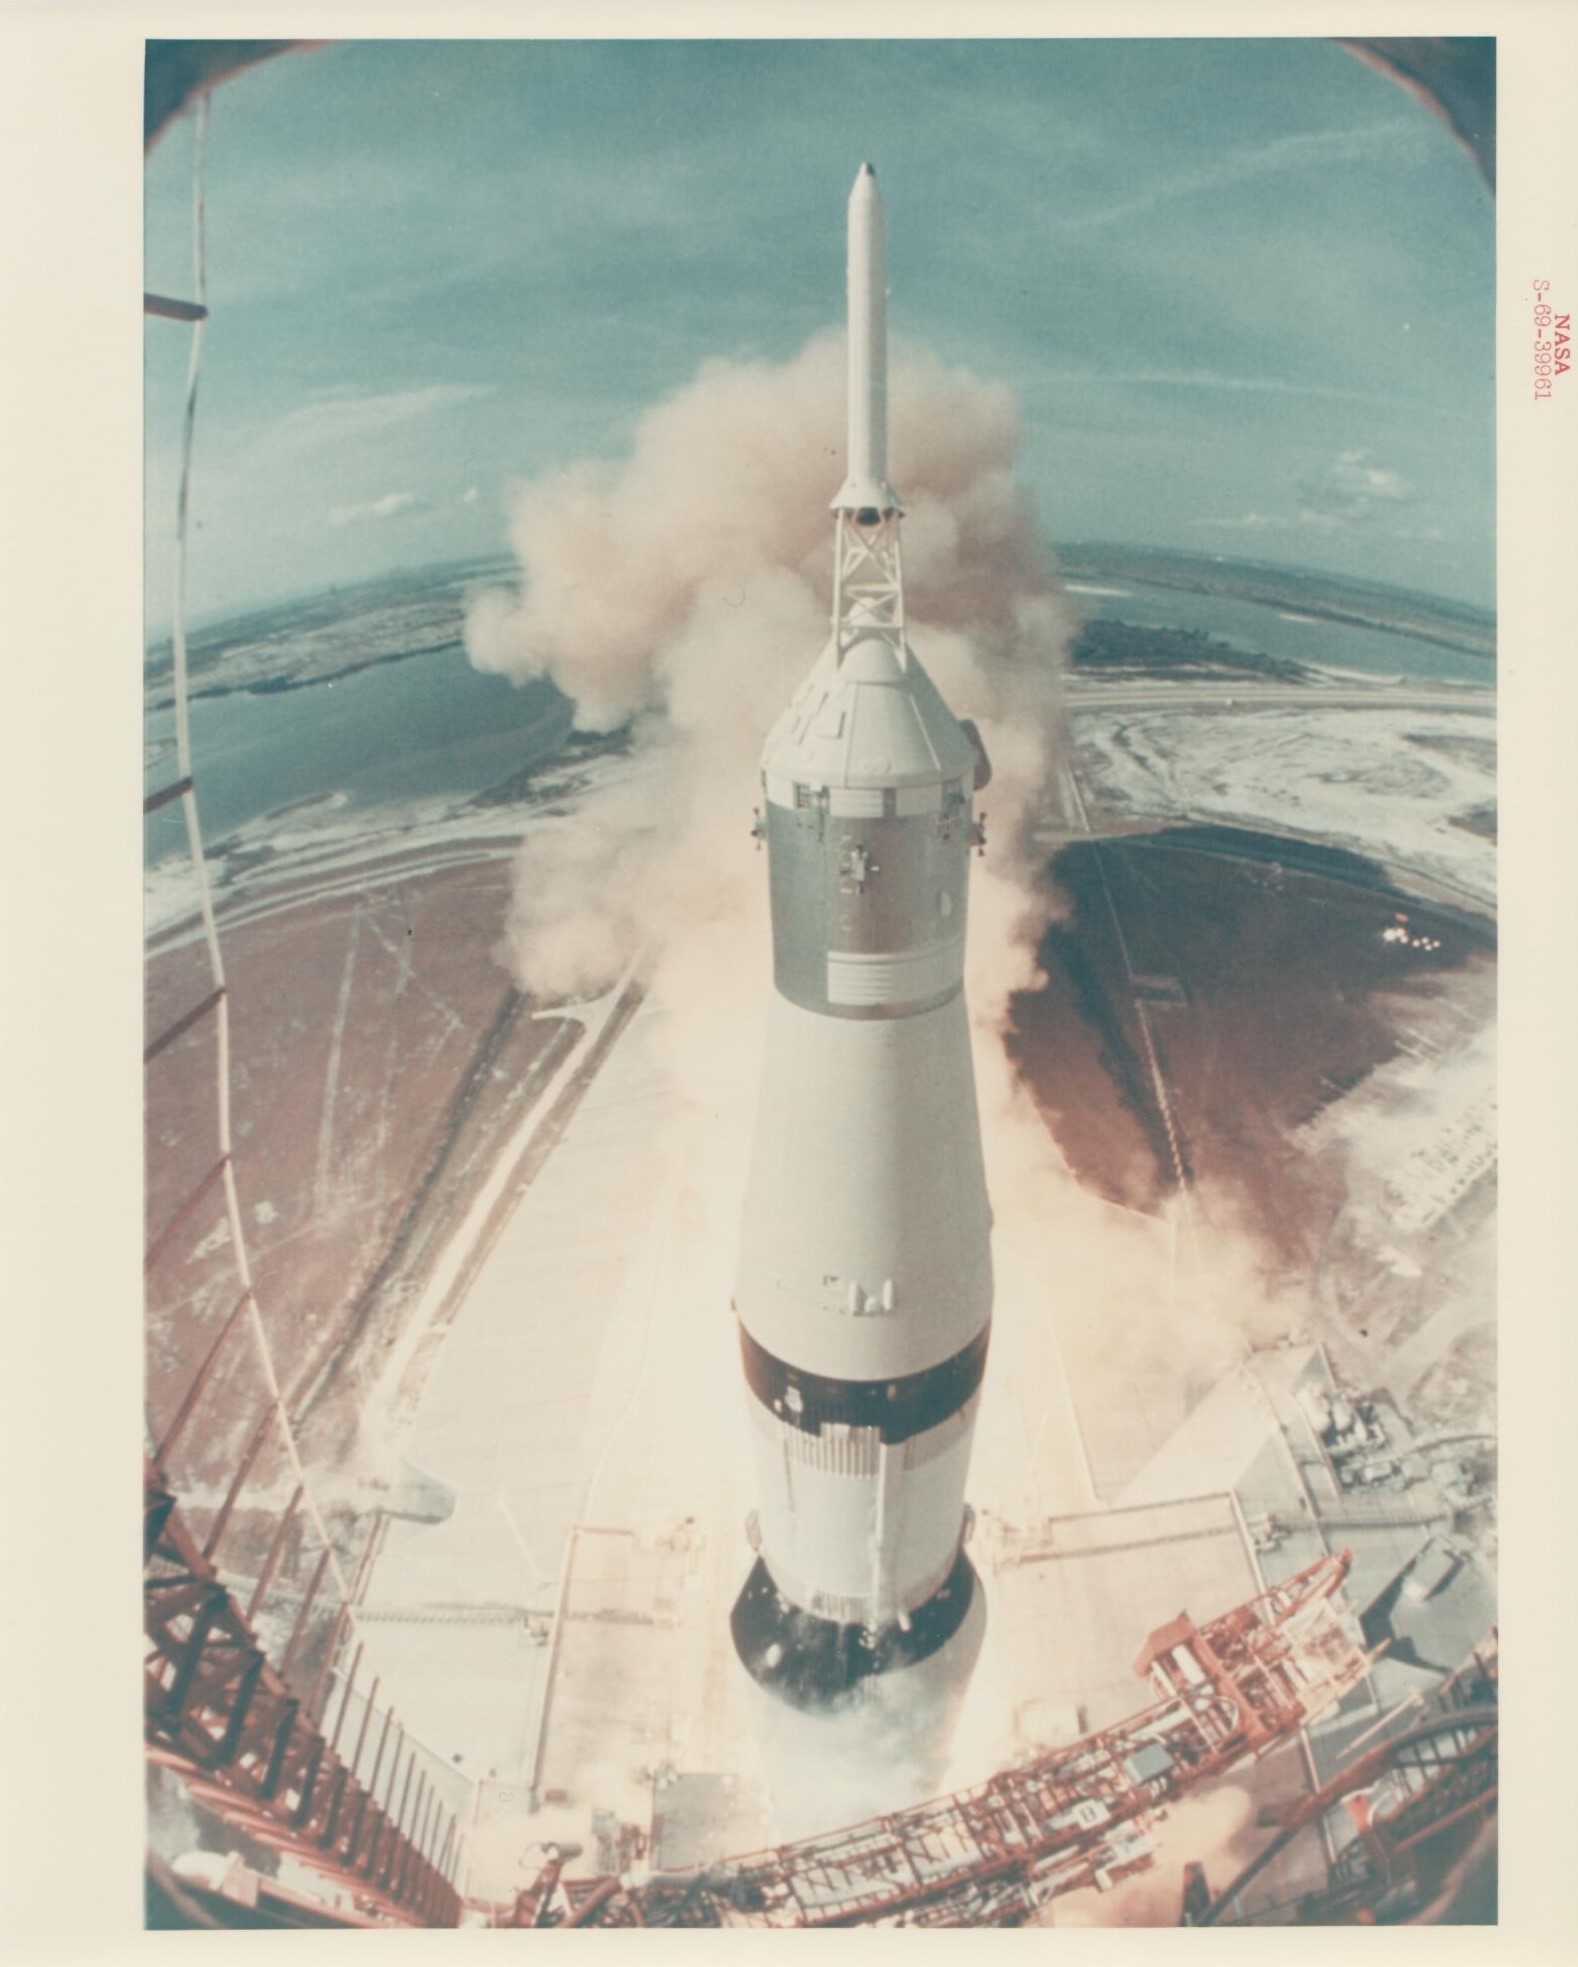 Apollo 11 lift-off seen from the top of the launch gantry, Apollo 11, July 1969